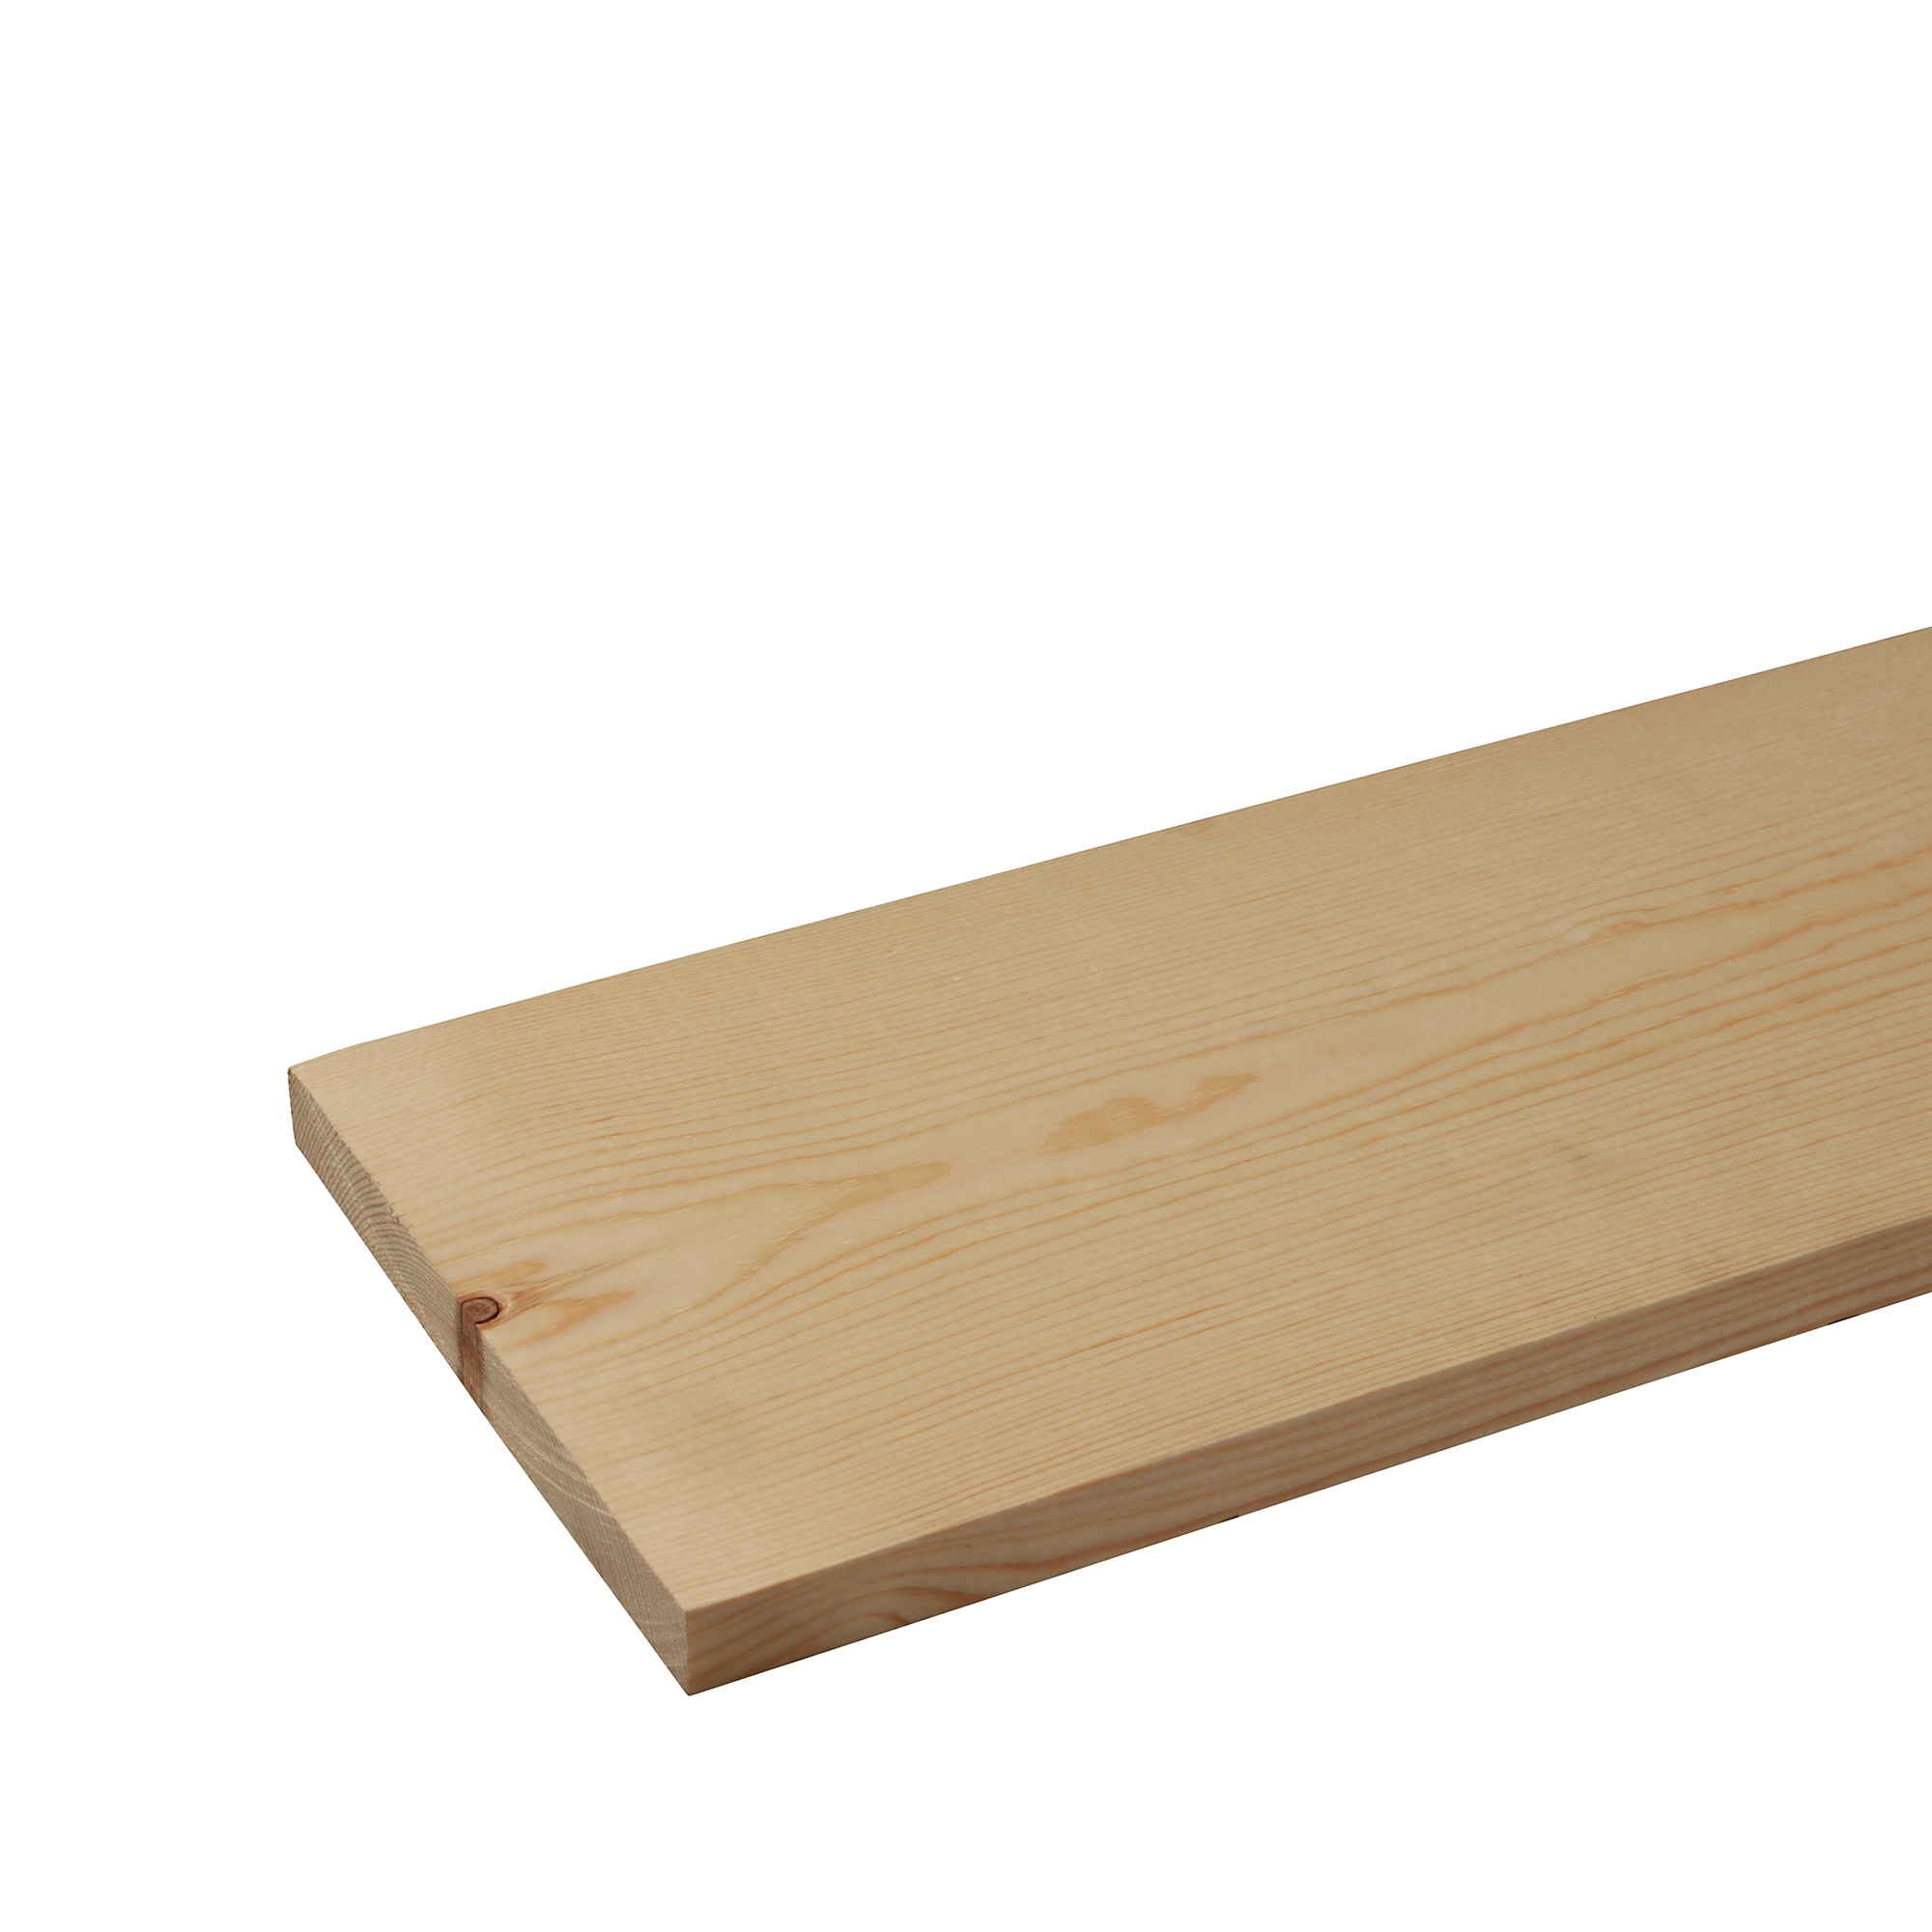 1 in. x 8 in. x 8 ft. Premium Kiln-Dried Square Edge Common Softwood Boards  914835 - The Home Depot